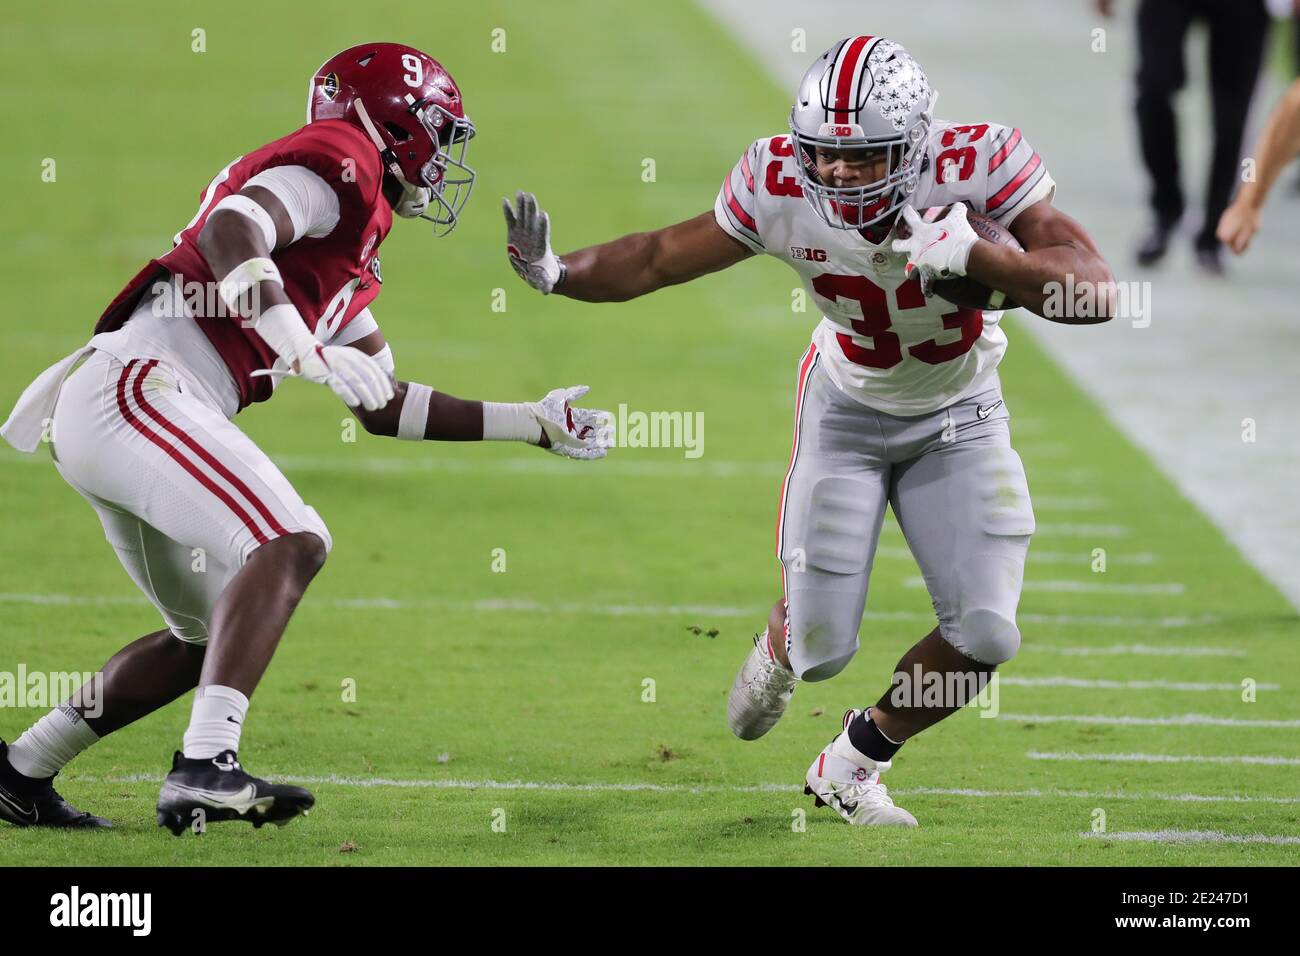 January 11, 2021: Ohio State Buckeyes running back MASTER TEAGUE III (33) runs the ball during the College Football Playoff National Championship at Hard Rock Stadium in Miami Gardens, Florida. Credit: Cory Knowlton/ZUMA Wire/Alamy Live News Stock Photo